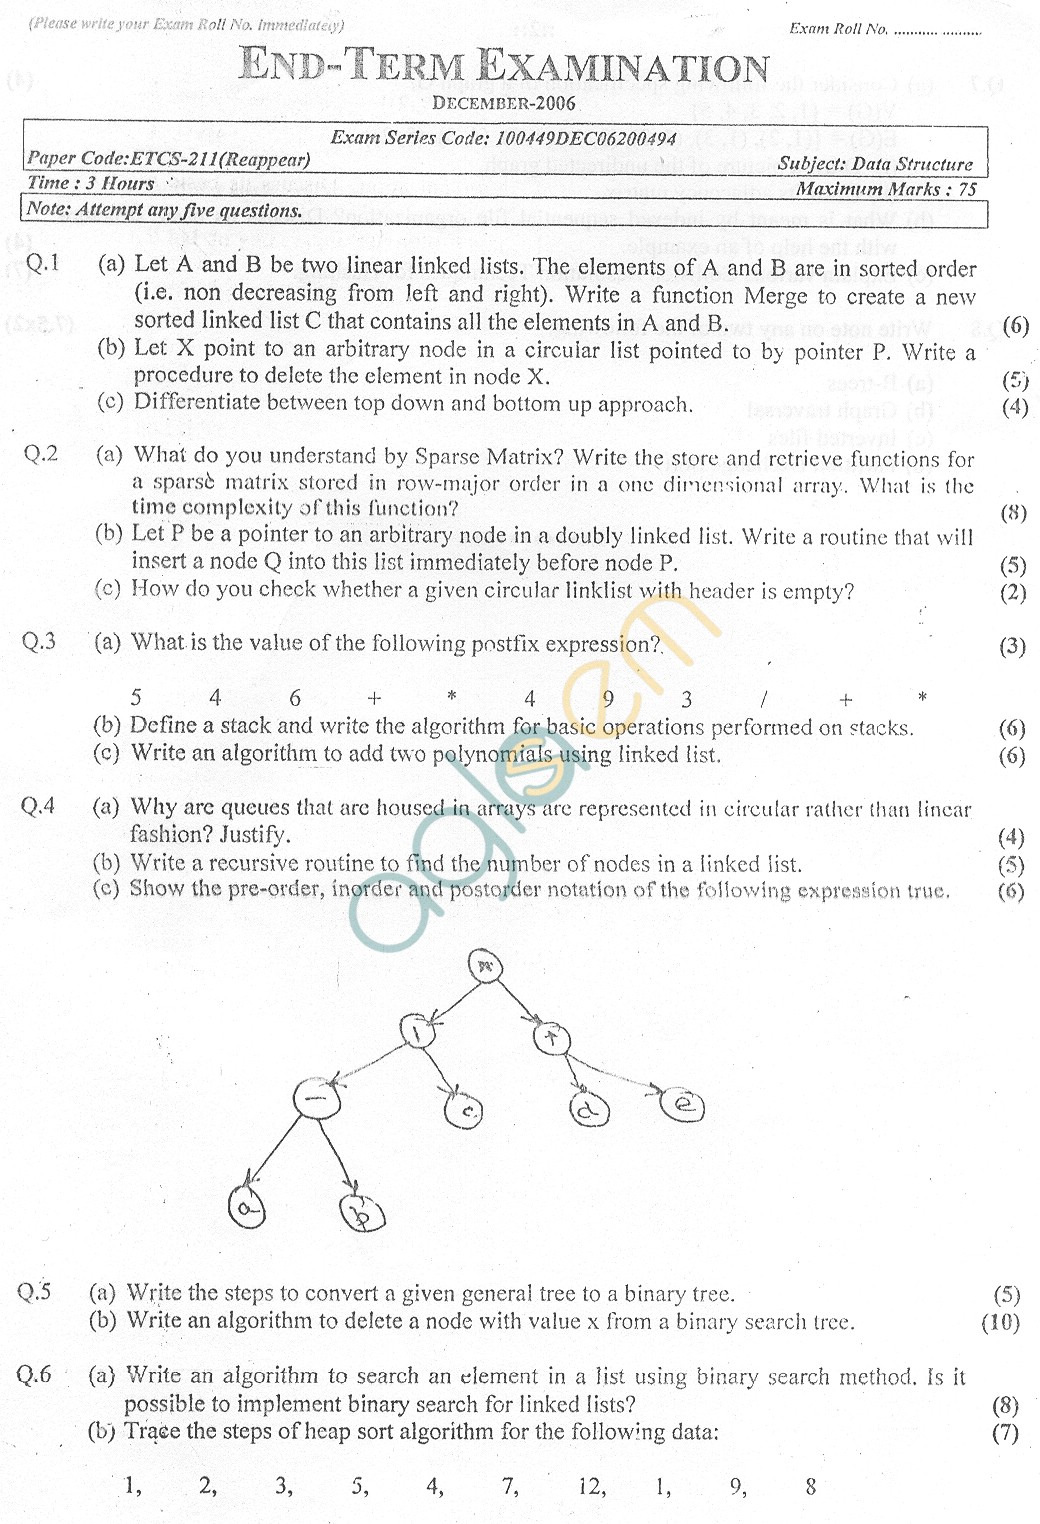 GGSIPU Question Papers Third Semester  End Term 2006  ETCS-211